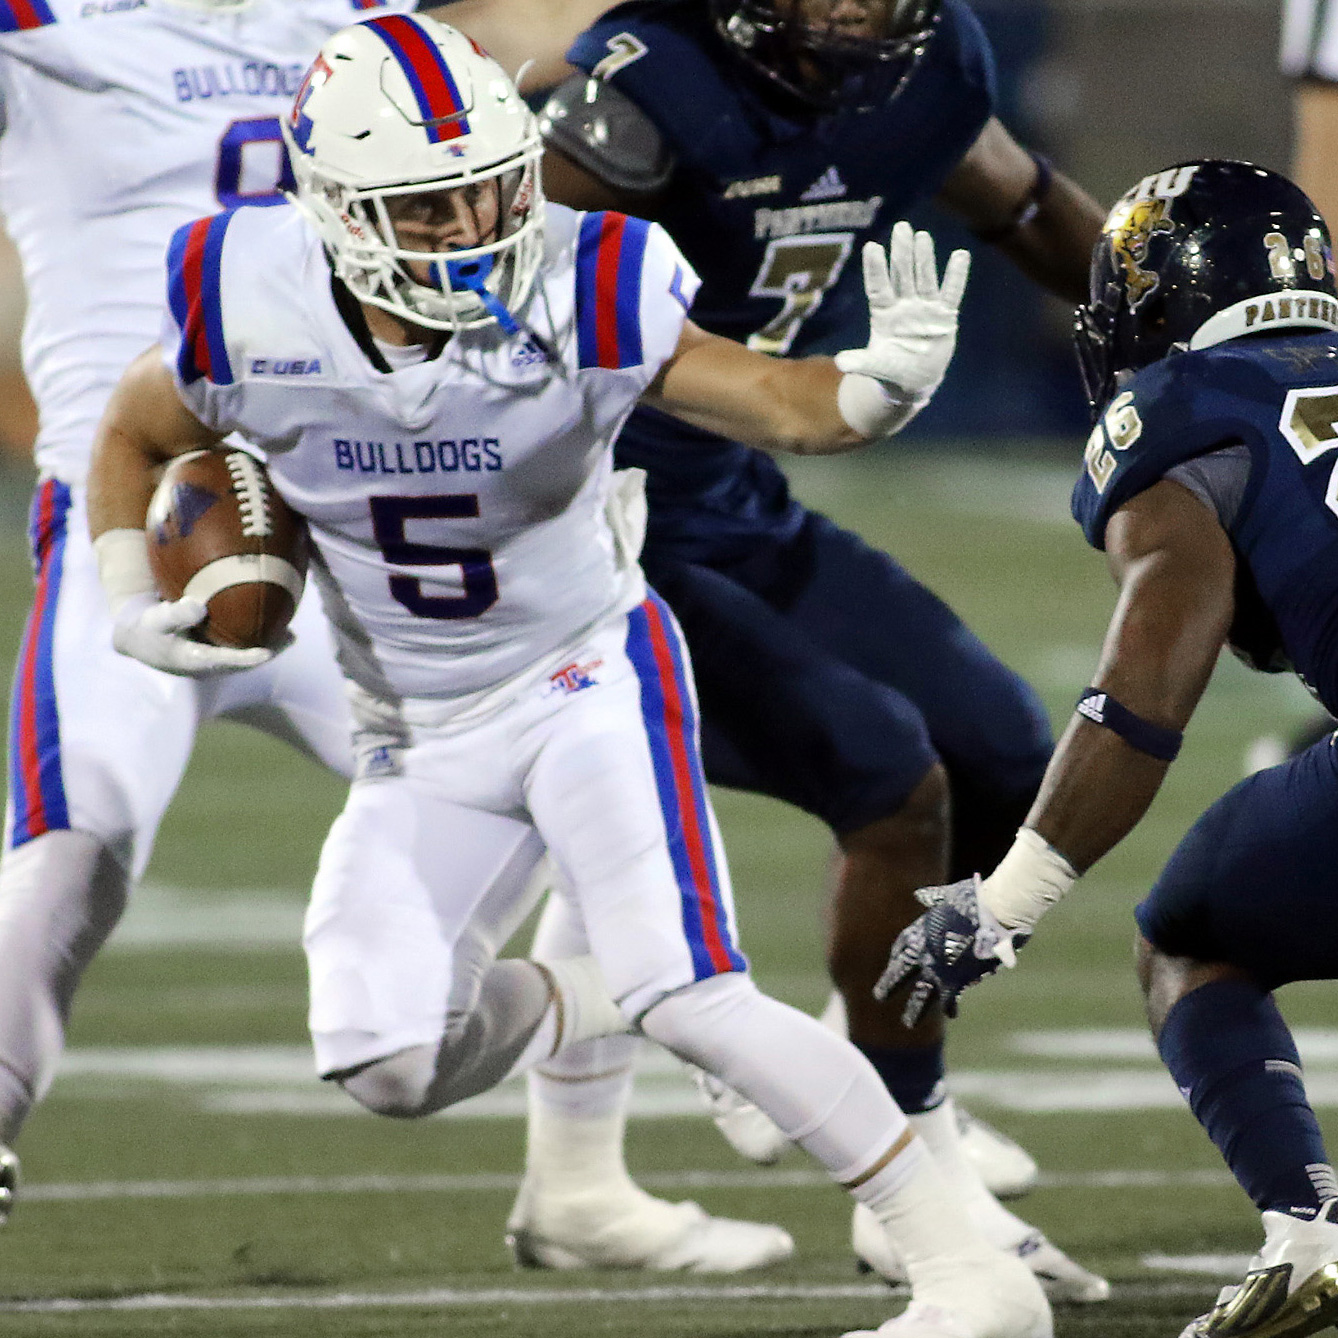 S09E10: FIU recap after 44-24 victory; preview Rice; answer questions about Louisiana Tech football